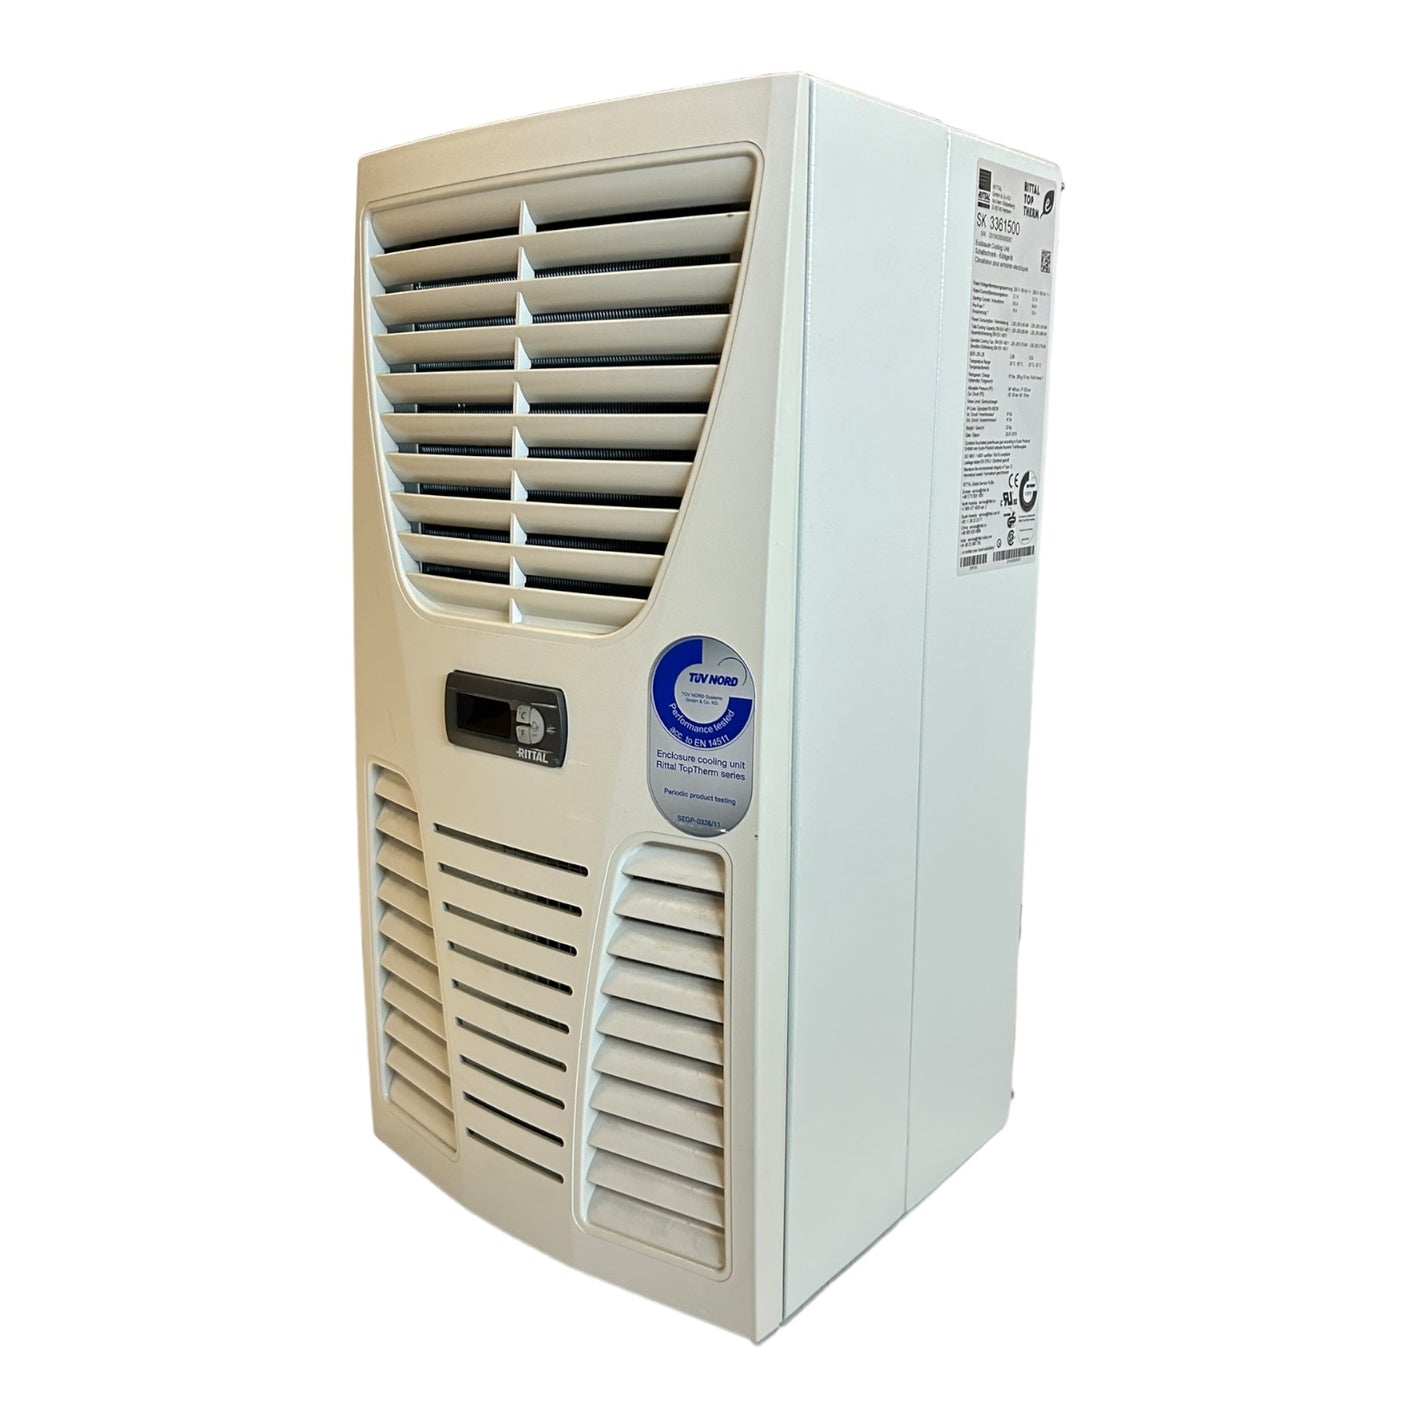 Rittal SK3361500 control cabinet cooling unit 230V cooling unit for industrial use